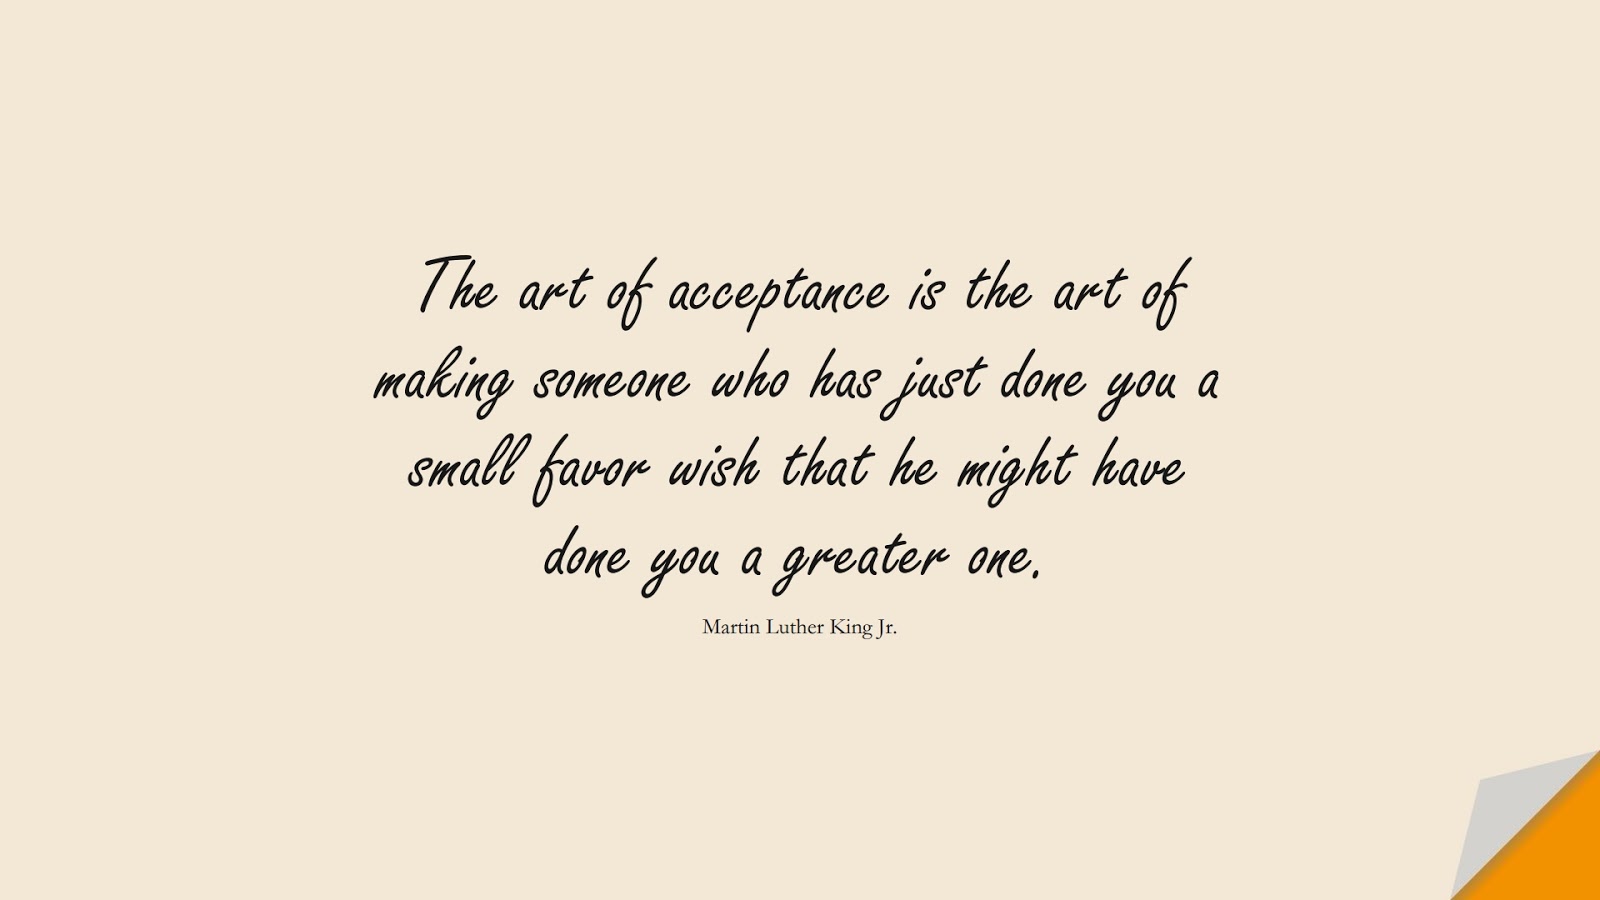 The art of acceptance is the art of making someone who has just done you a small favor wish that he might have done you a greater one. (Martin Luther King Jr.);  #MartinLutherKingJrQuotes